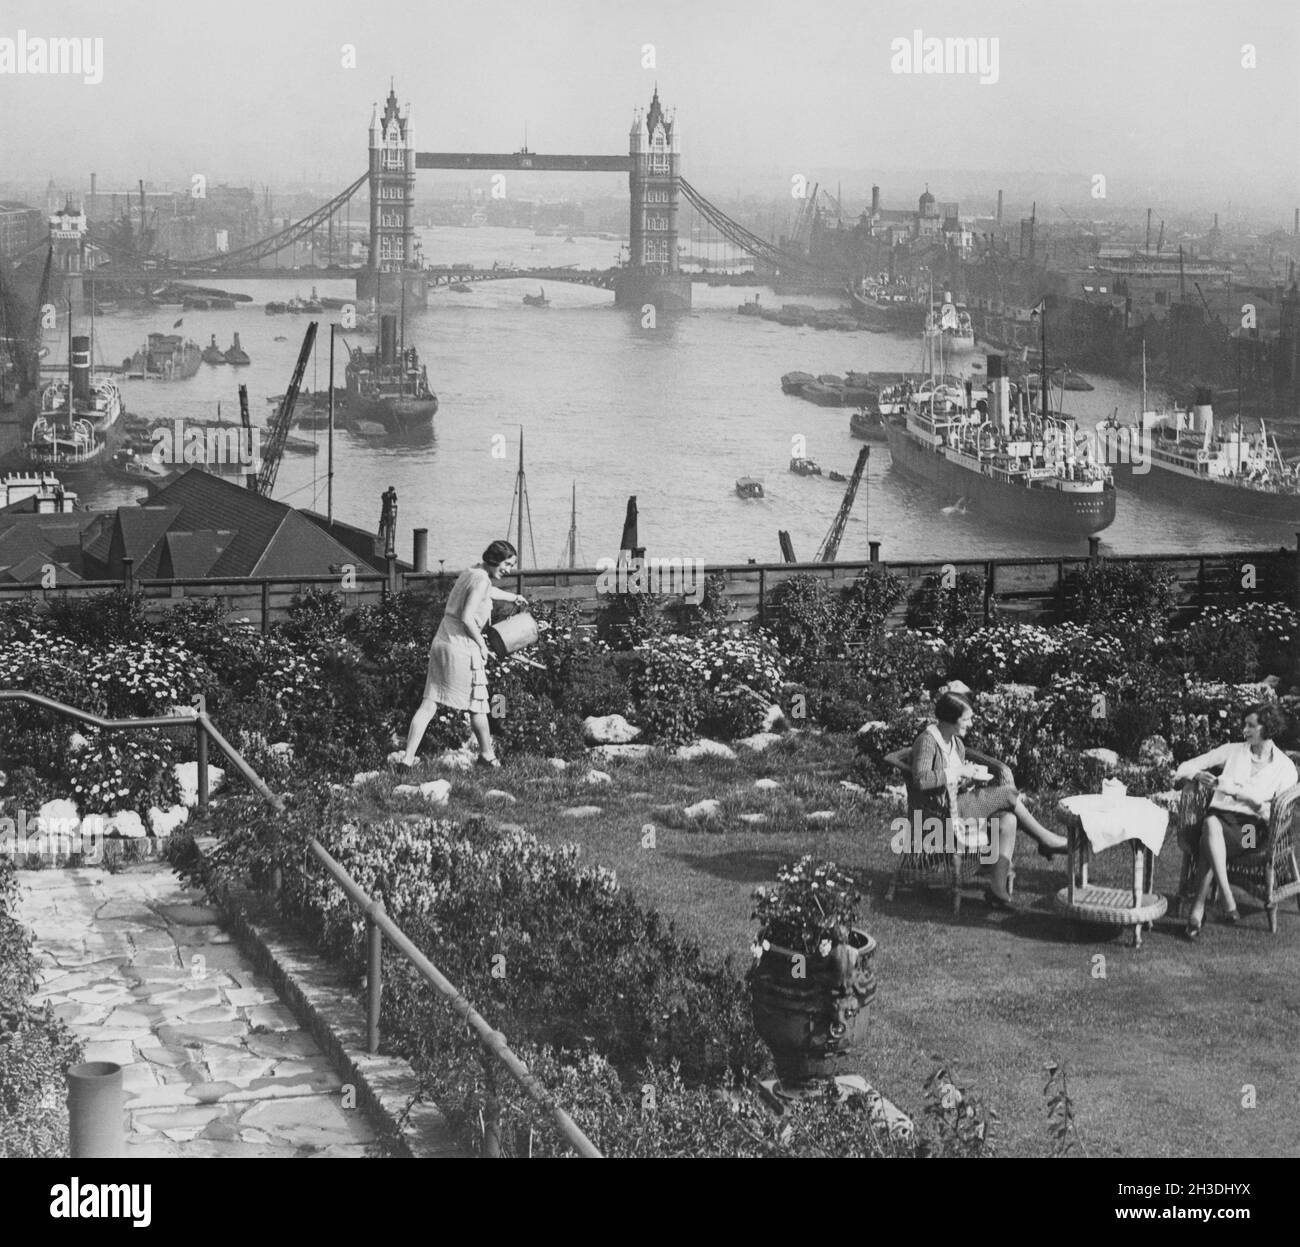 London in the 1930s. A view over river Thames and Tower Bridge from Adelaide house. In the foreground tea is served and enjoyed on the green terrace. August 27 1935. Stock Photo